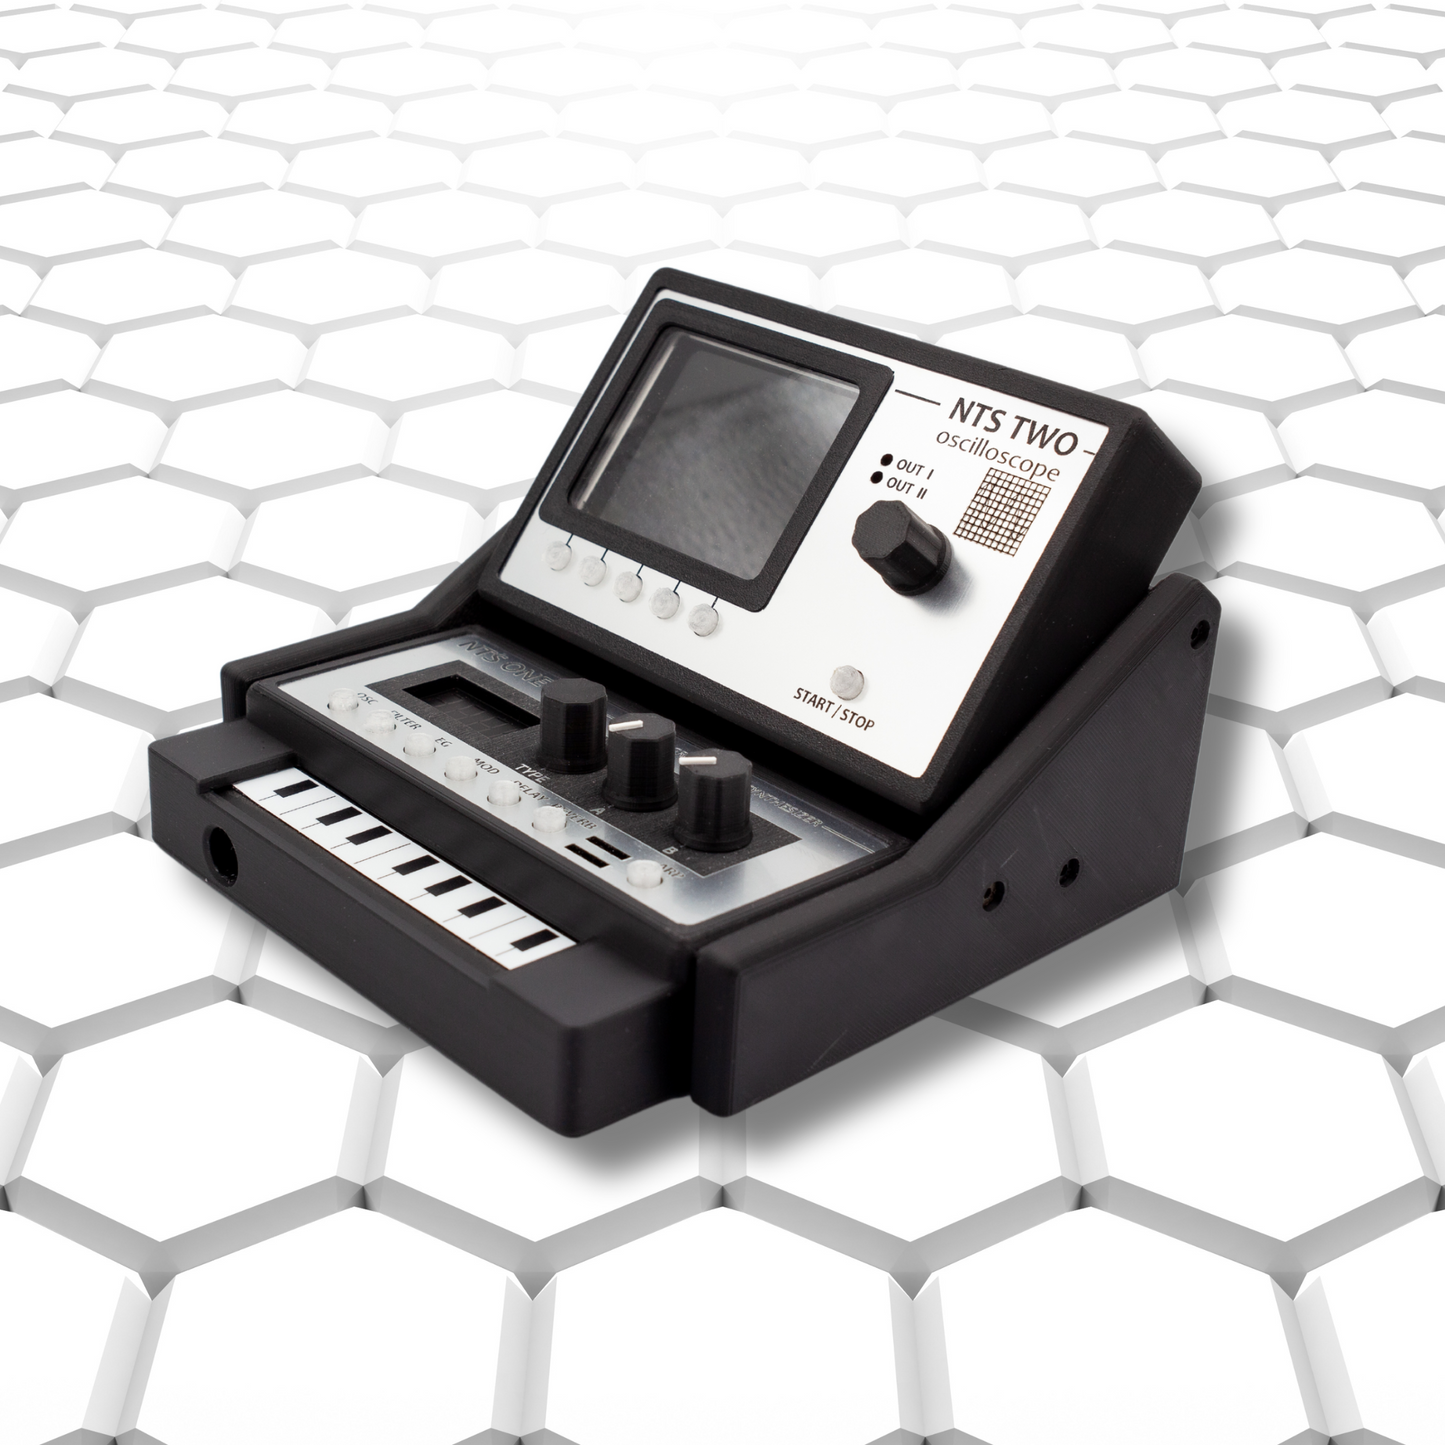 3D printed cases for Korg NTS-1 and Korg NTS-2 + stand